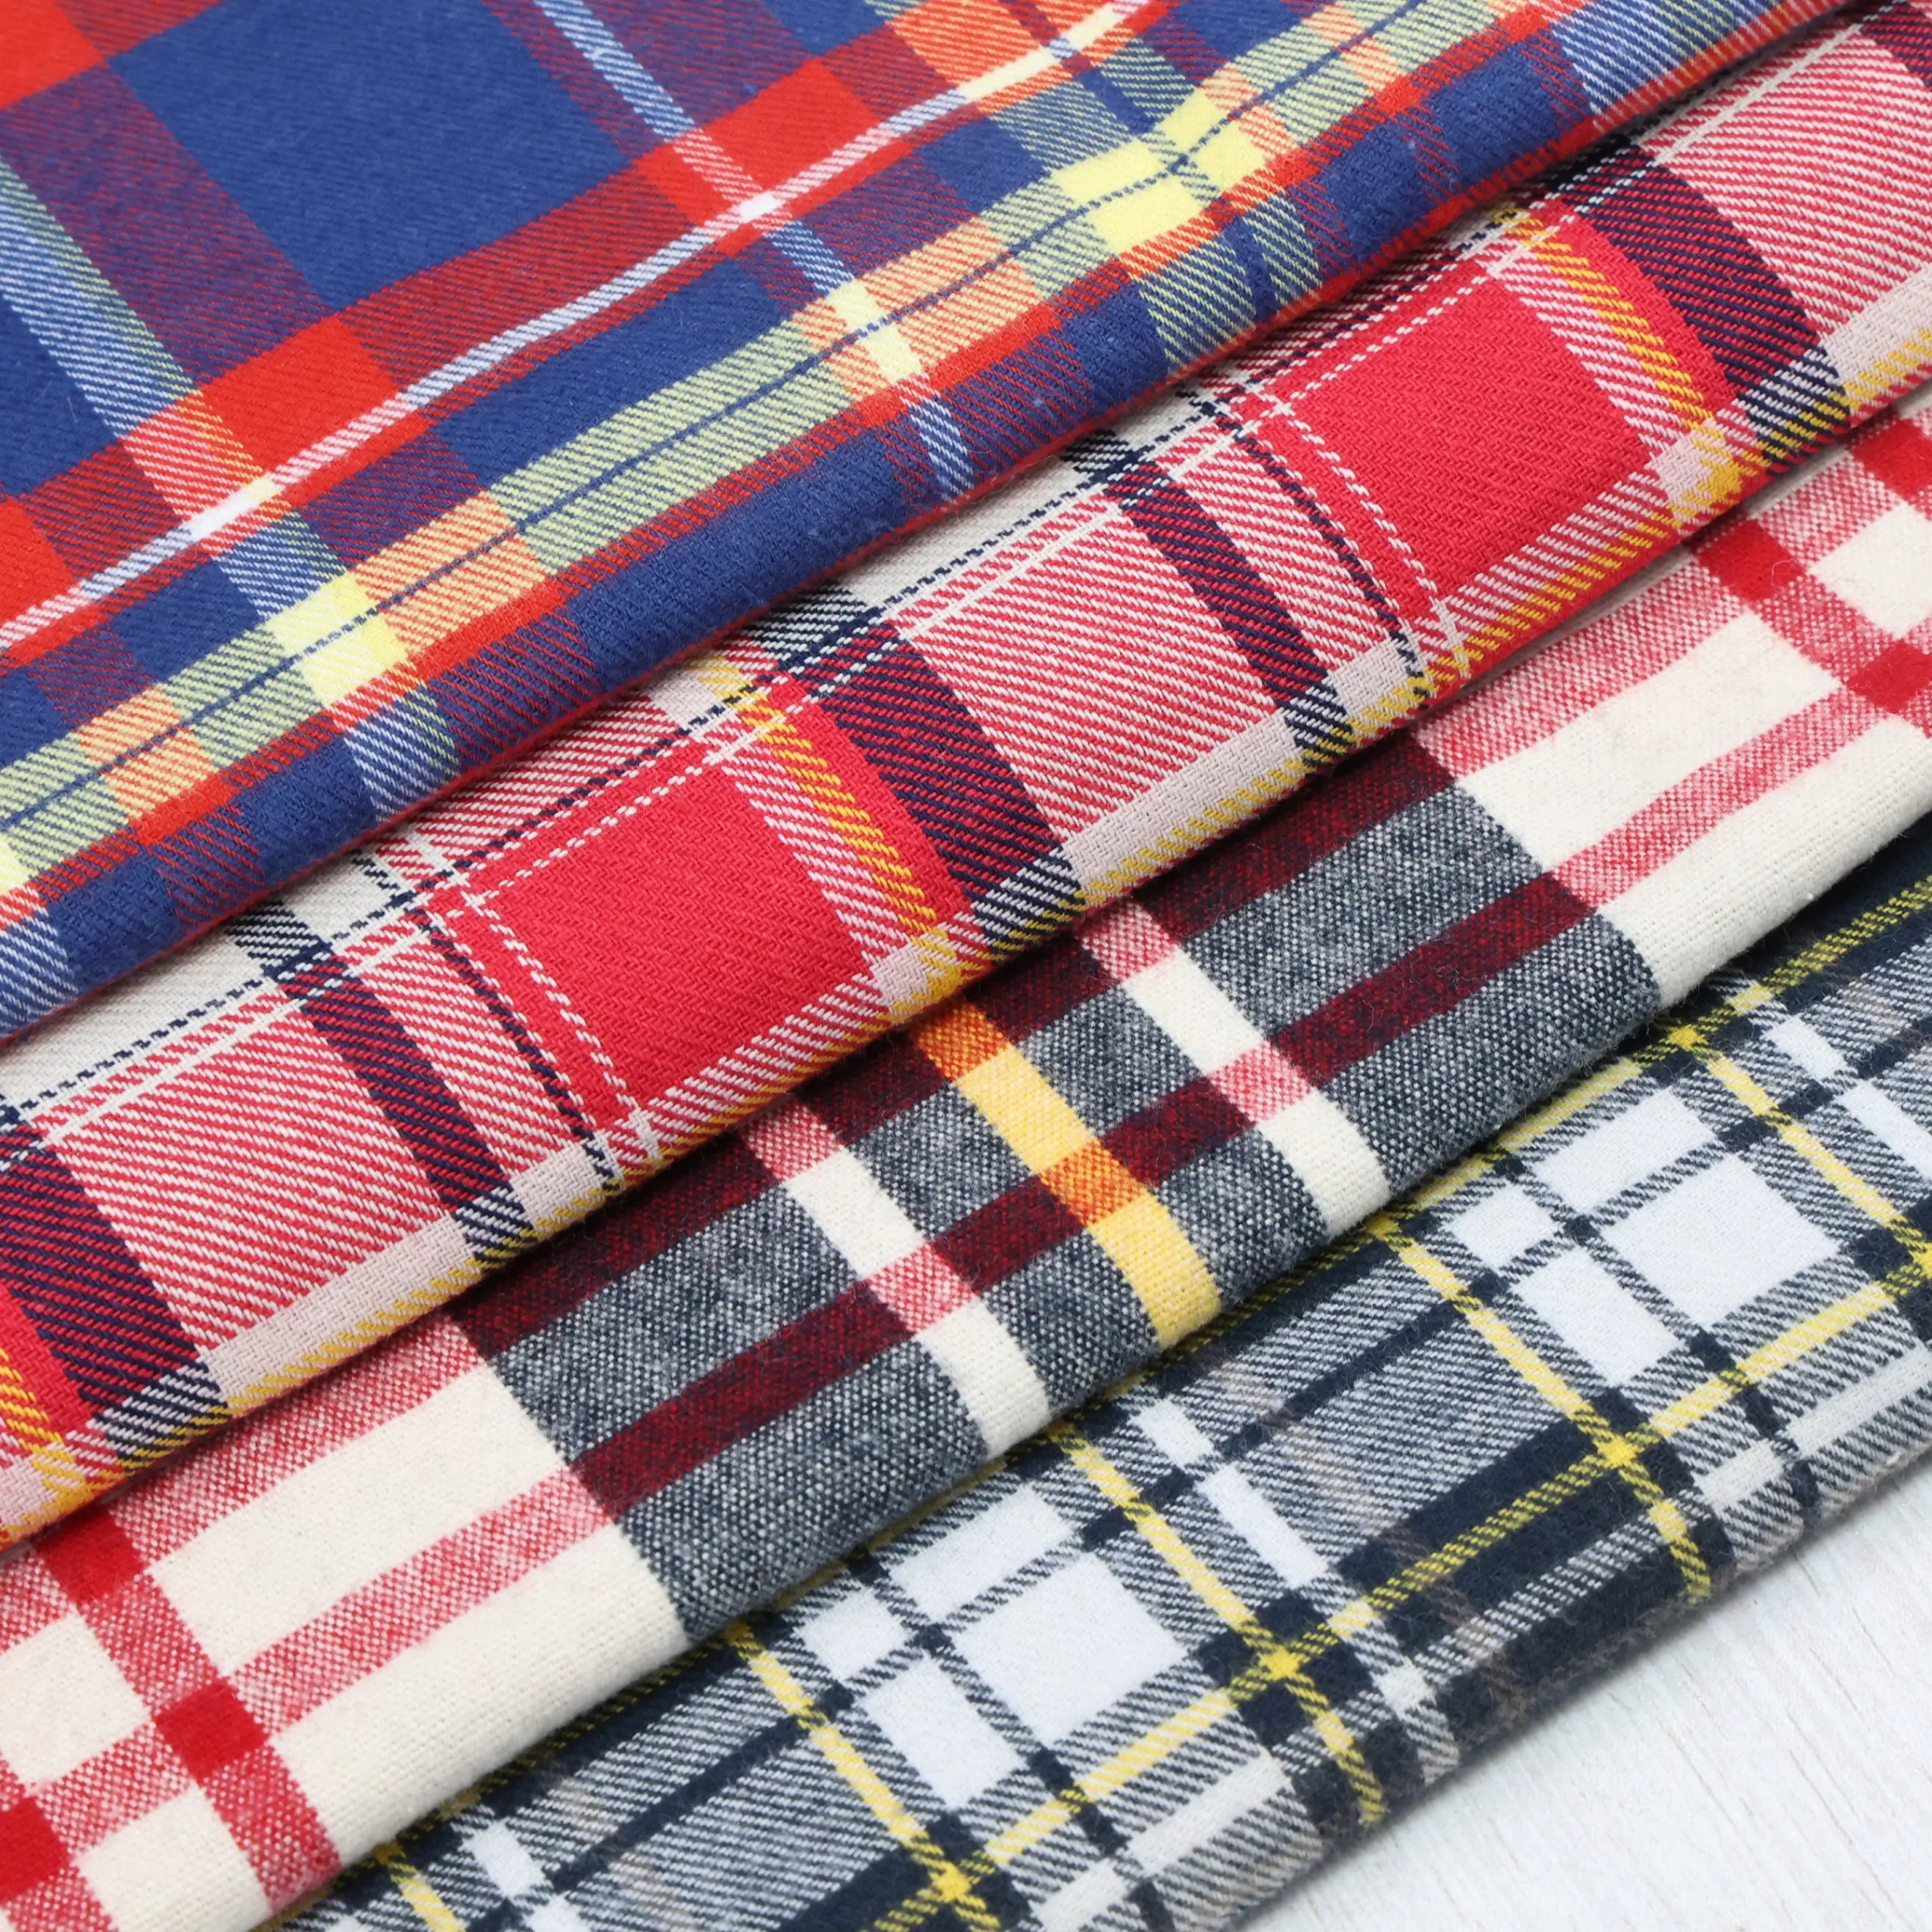 China Manufacturer 100% Cotton Yarn Dyed Woven Twill Check Flannel Fabric for Shirts